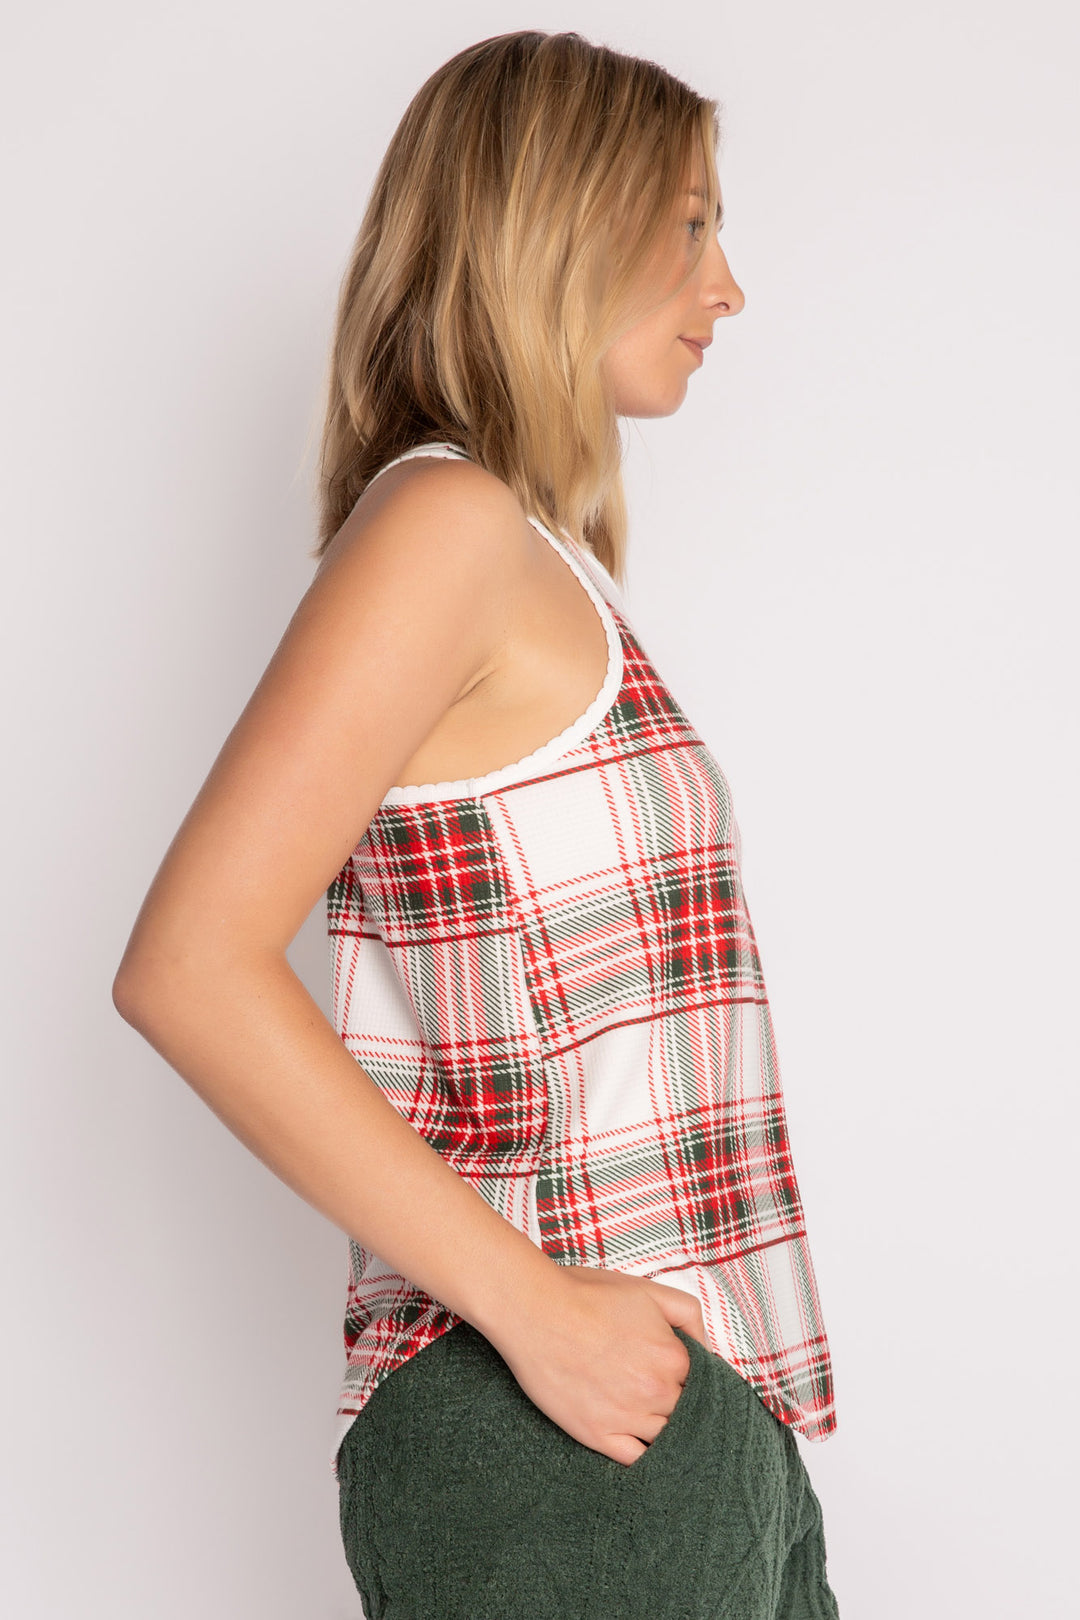 Sleep tank top in ivory-red-green plaid on velour thermal. Scallop edge neck & rounded hem. (7257679560804)